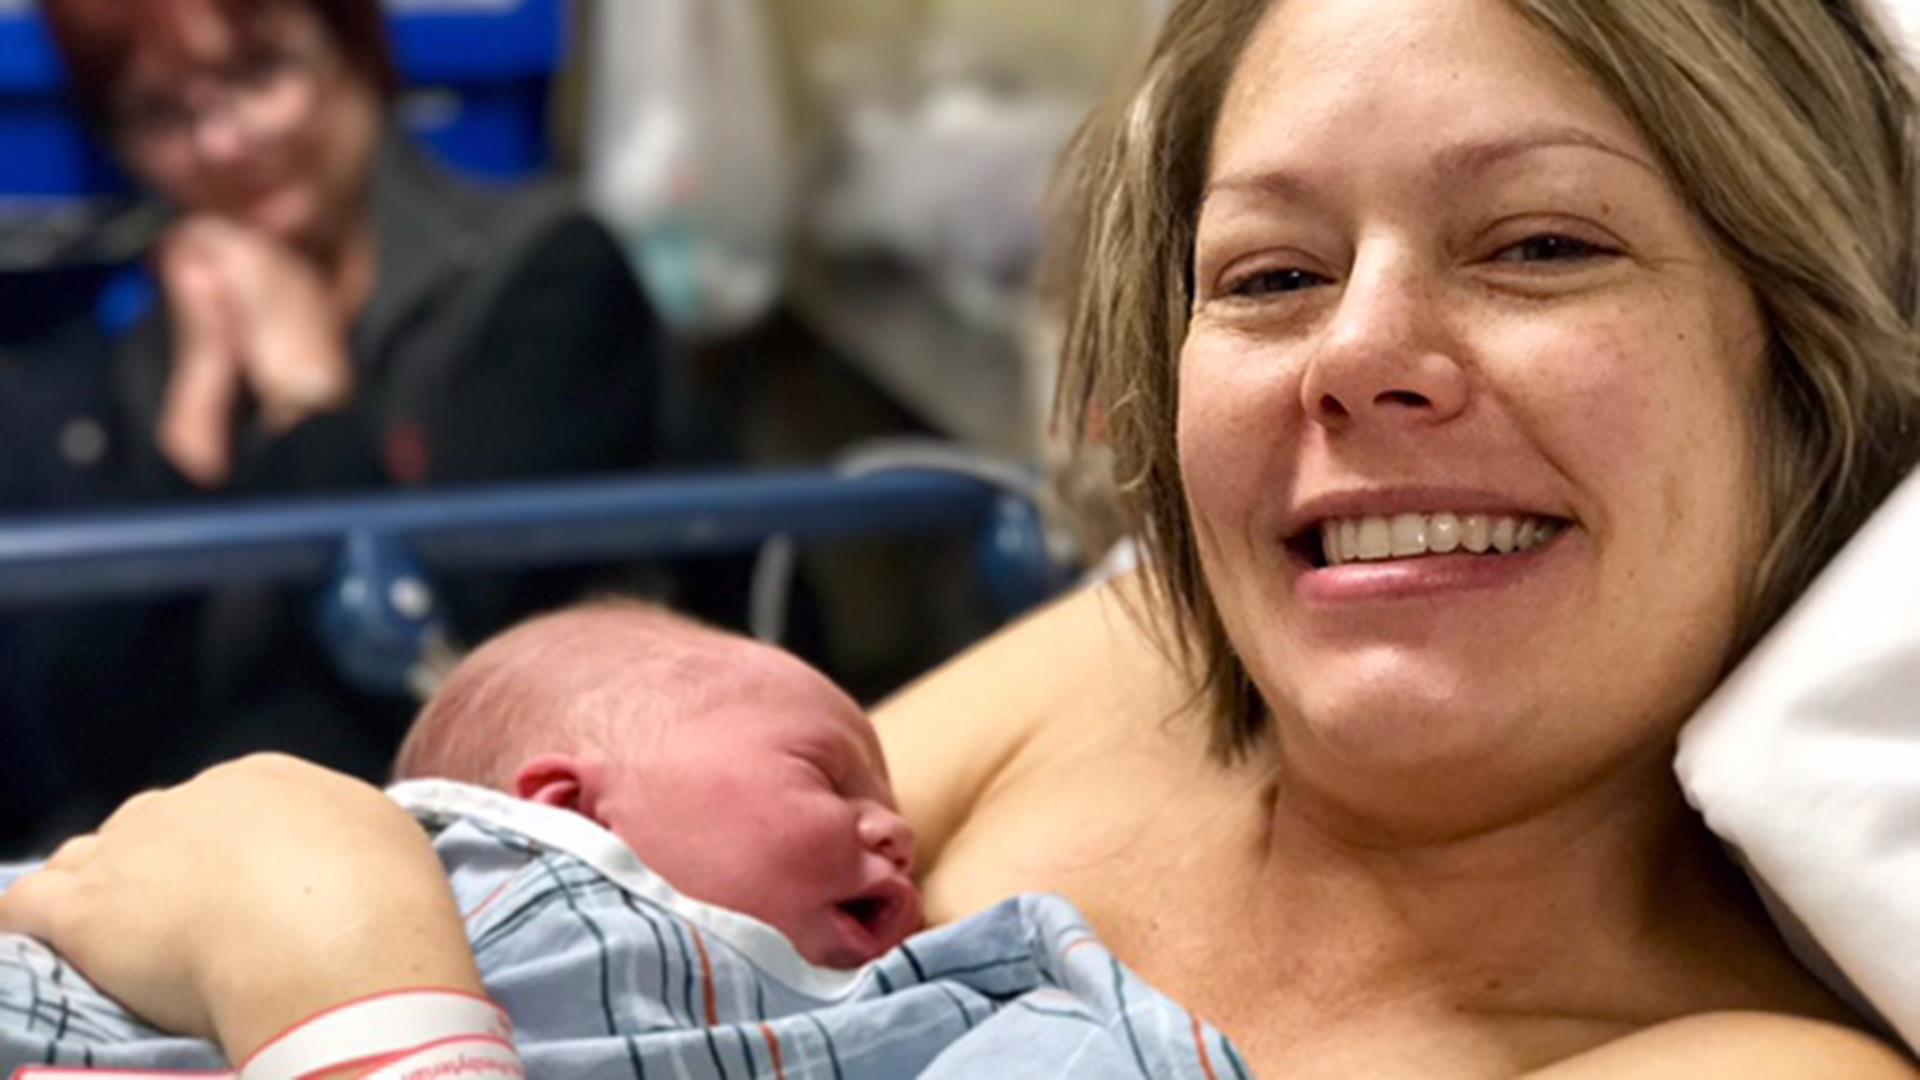 Dylan Dreyer gives birth to baby boy! See the adorable 